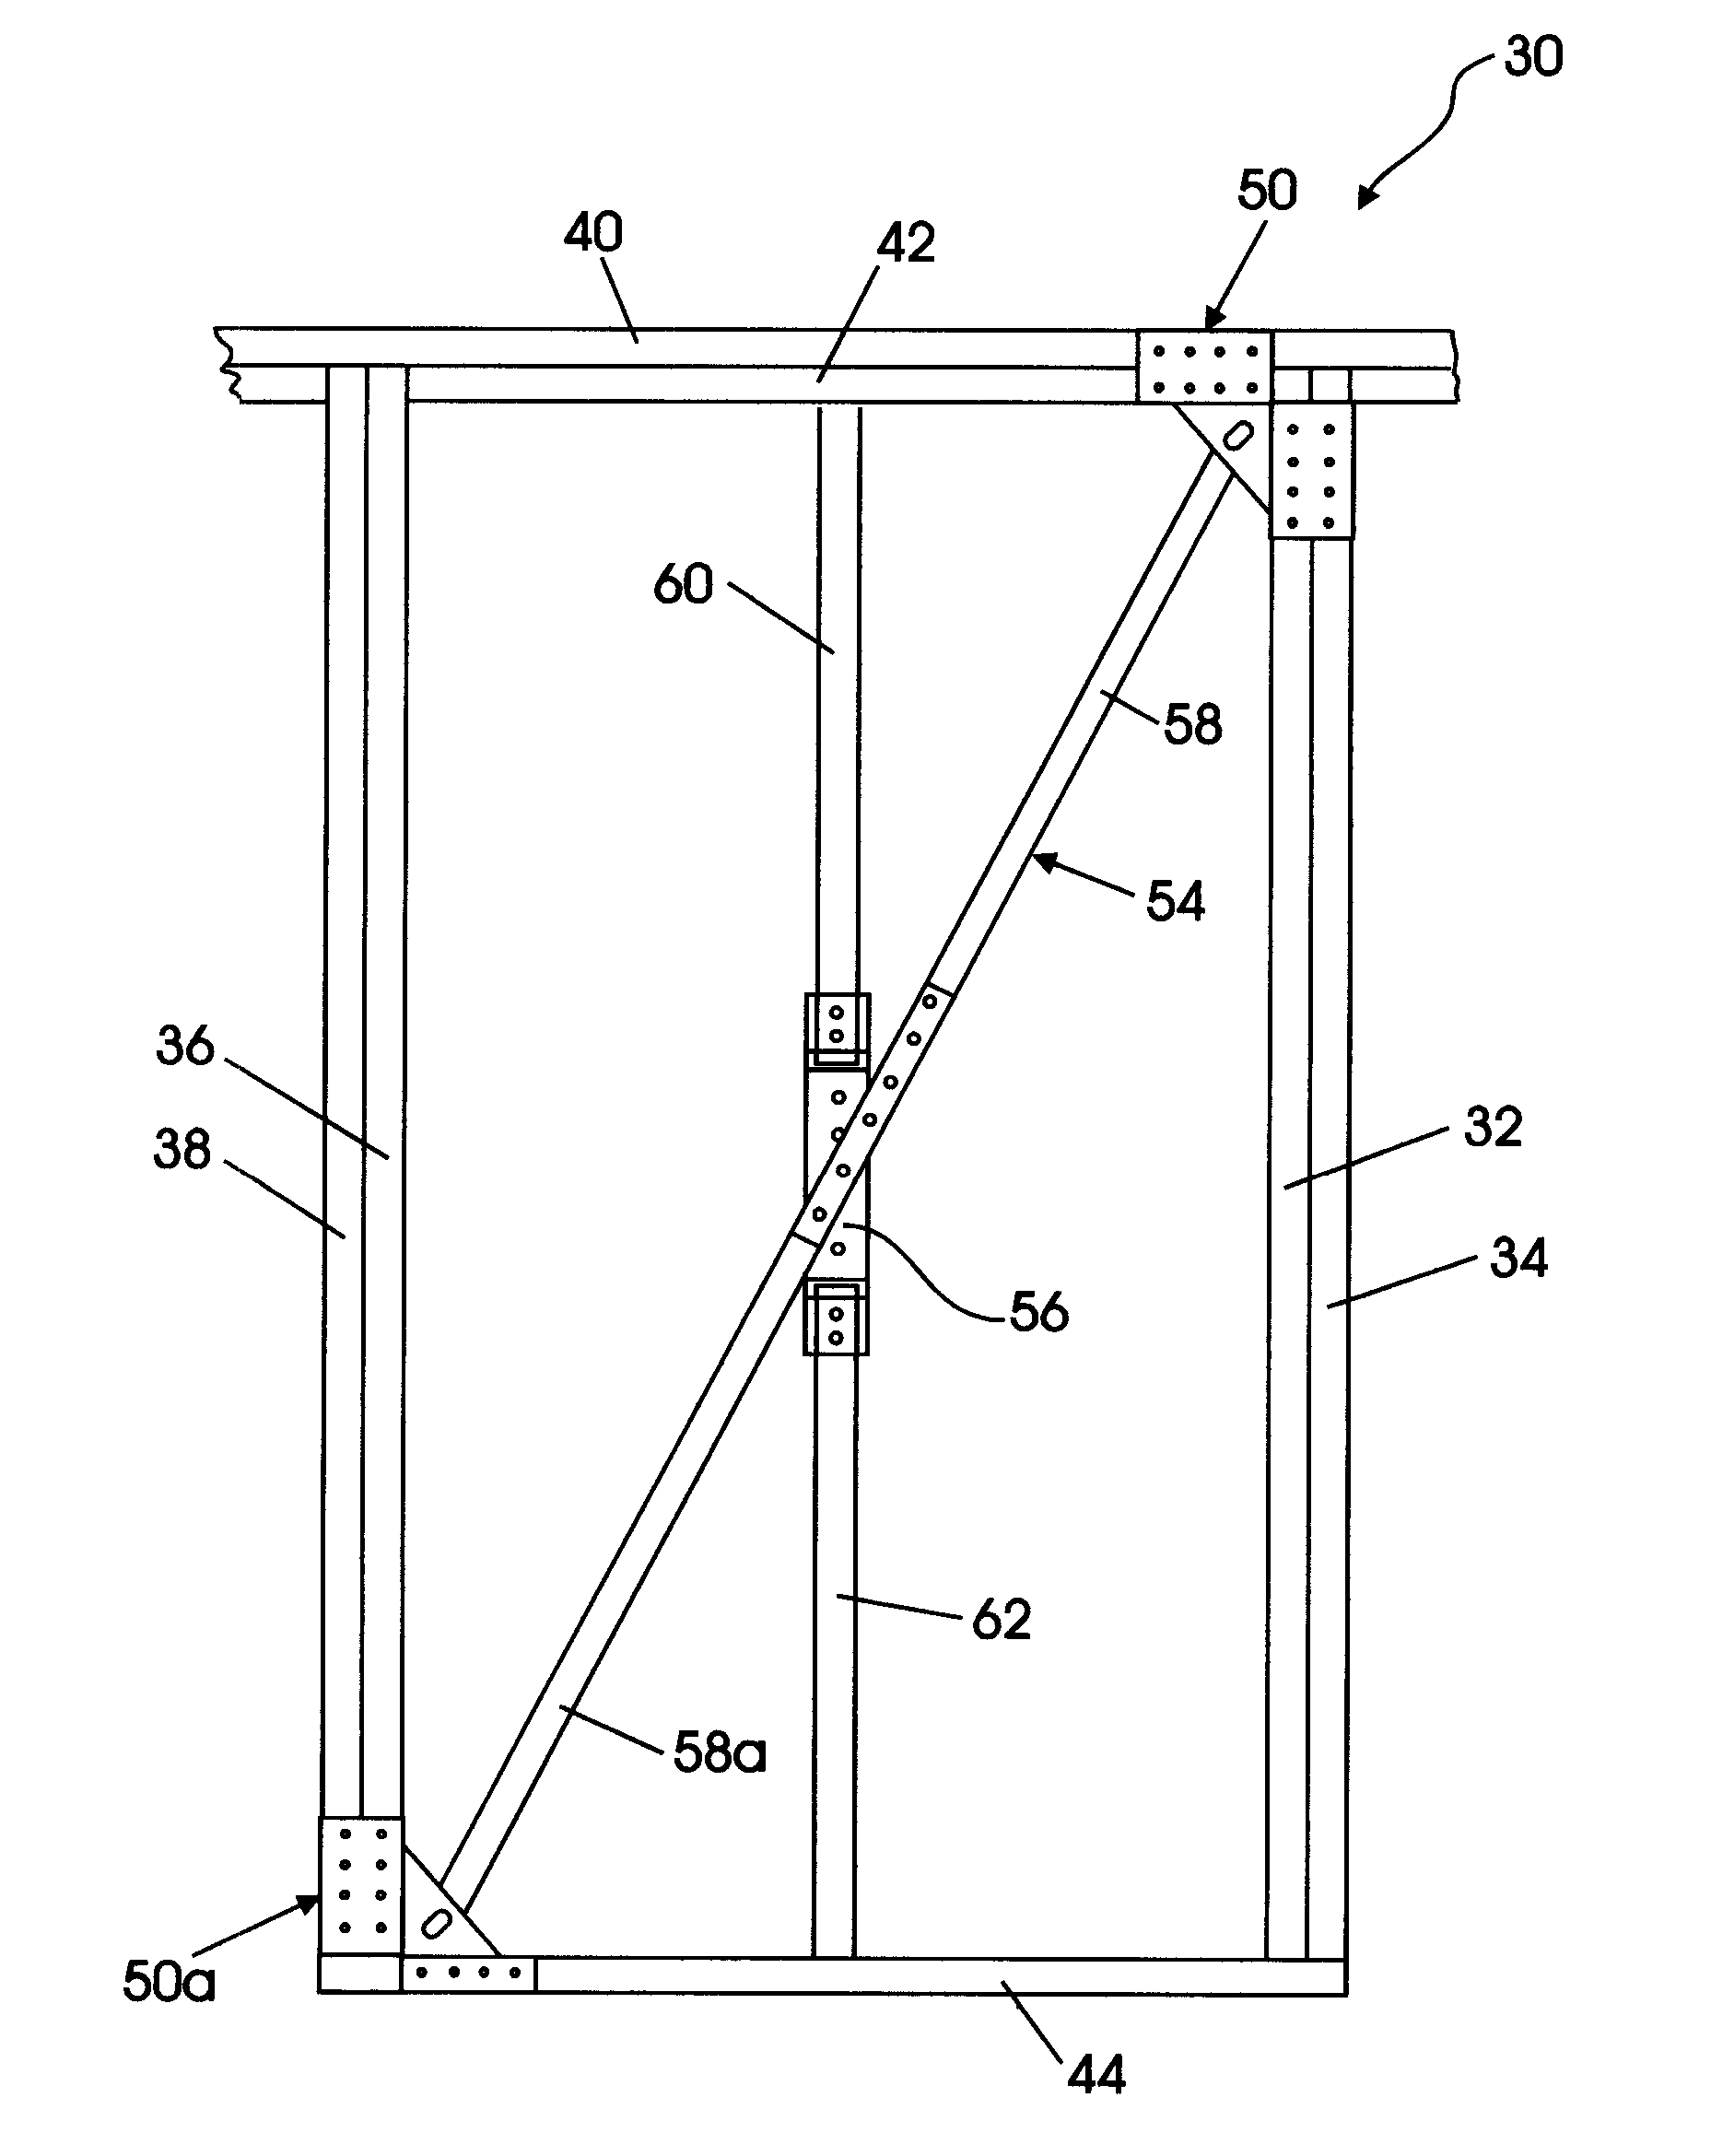 Lateral and uplift resistance apparatus and methods for use in structural framing